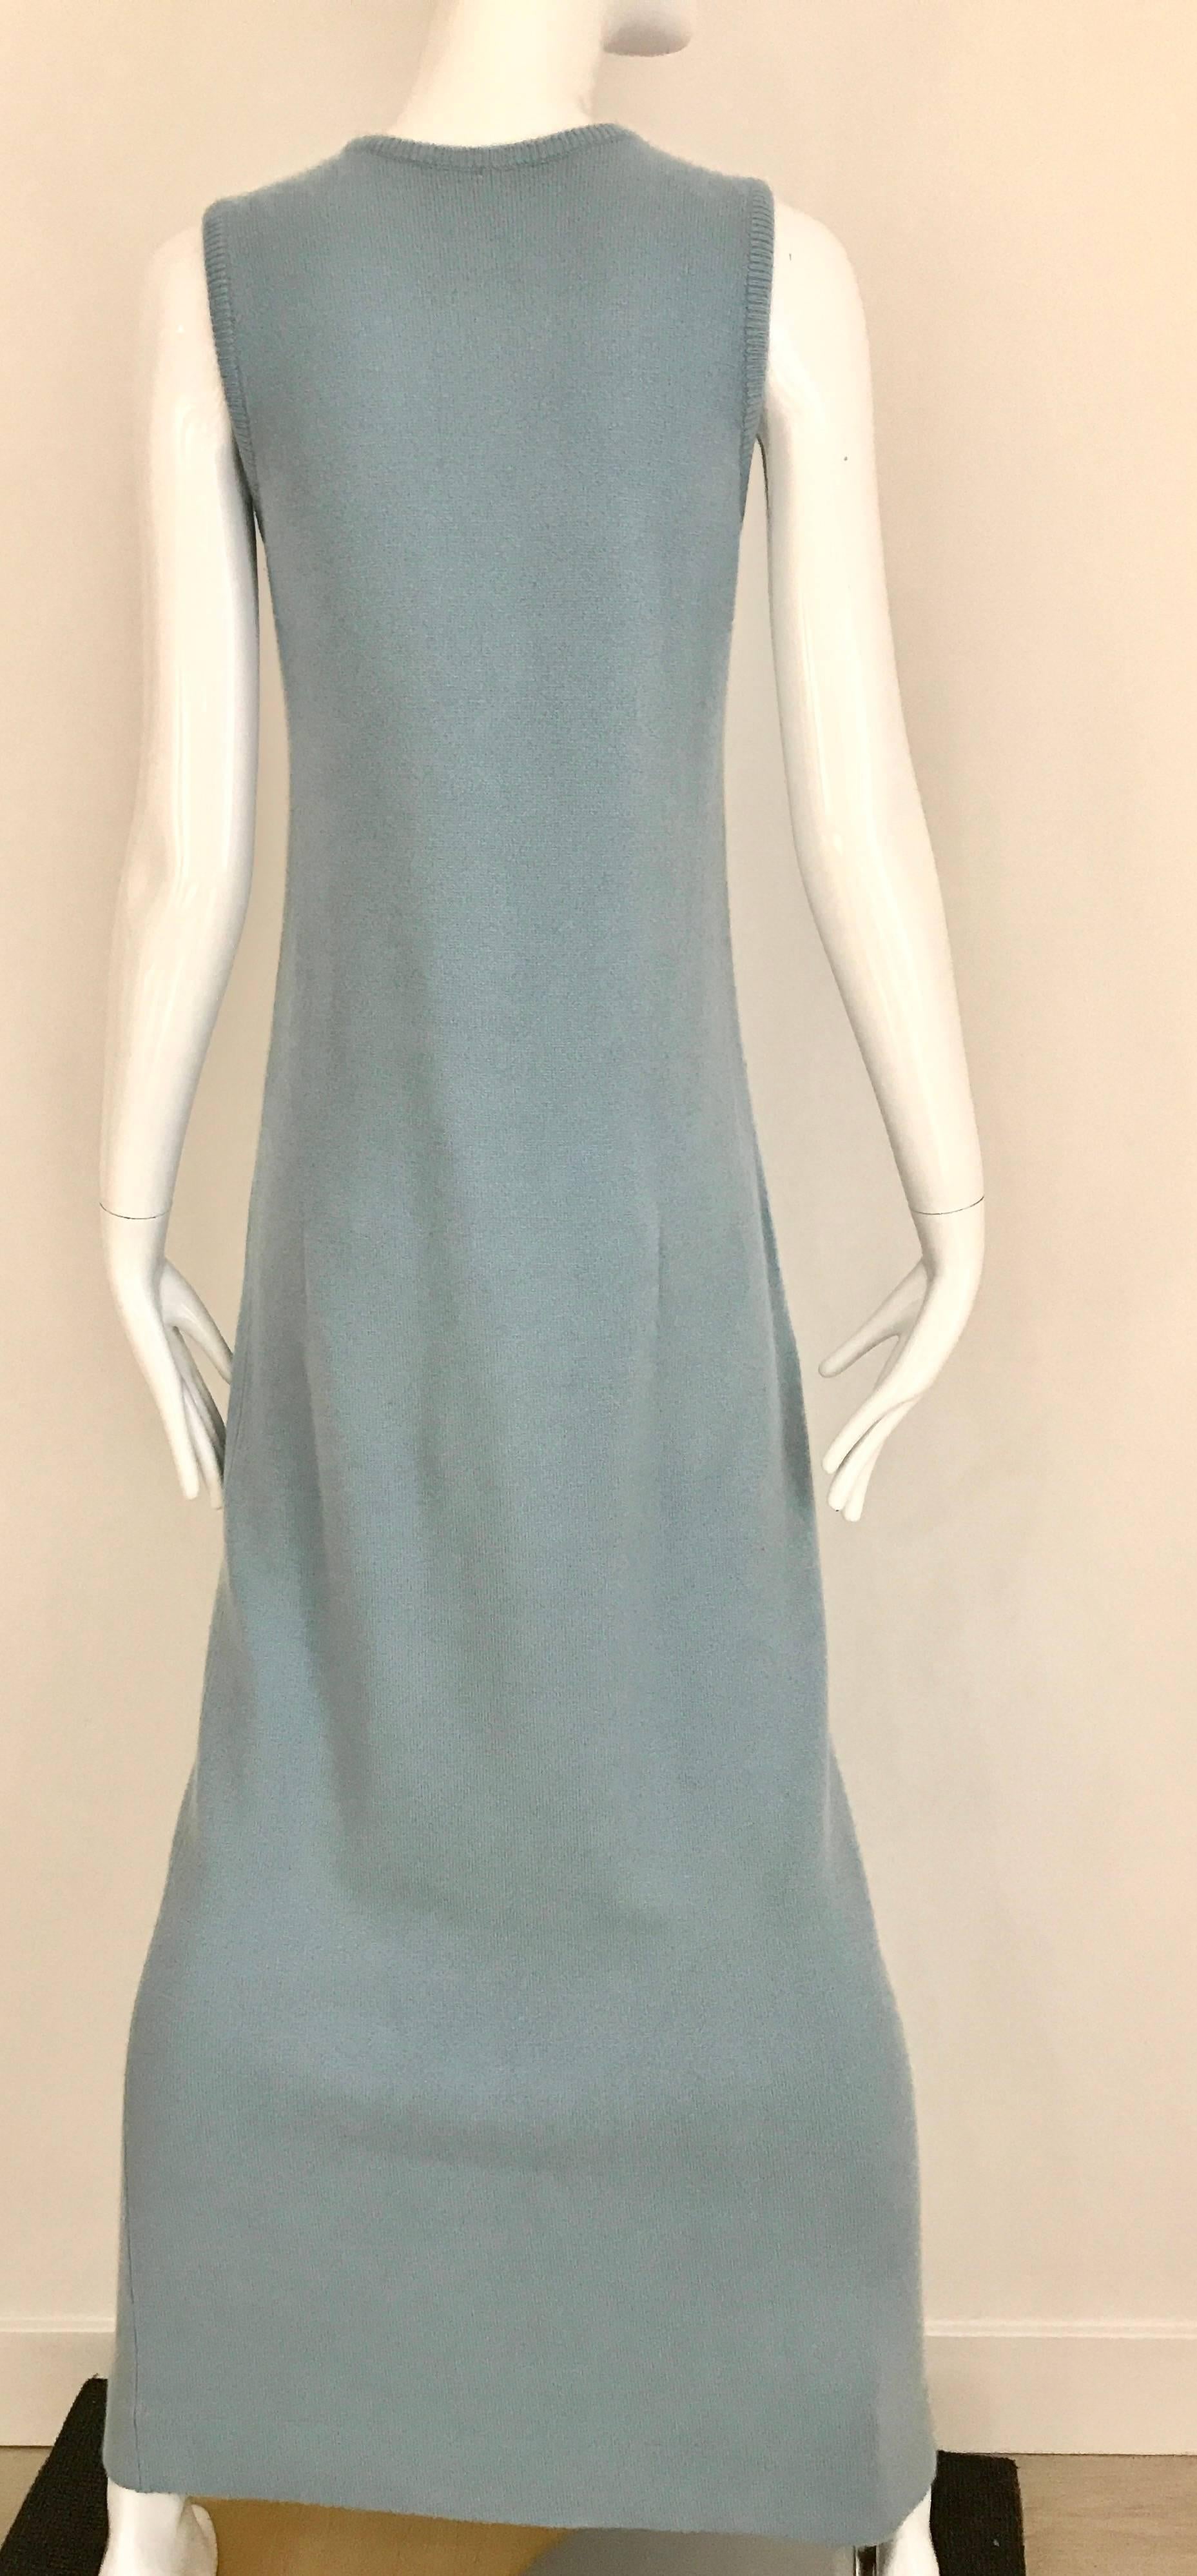 1970s HALSTON Baby Blue Sleeveless Cashmere Vintage Sweater 70s Dress In Good Condition For Sale In Beverly Hills, CA